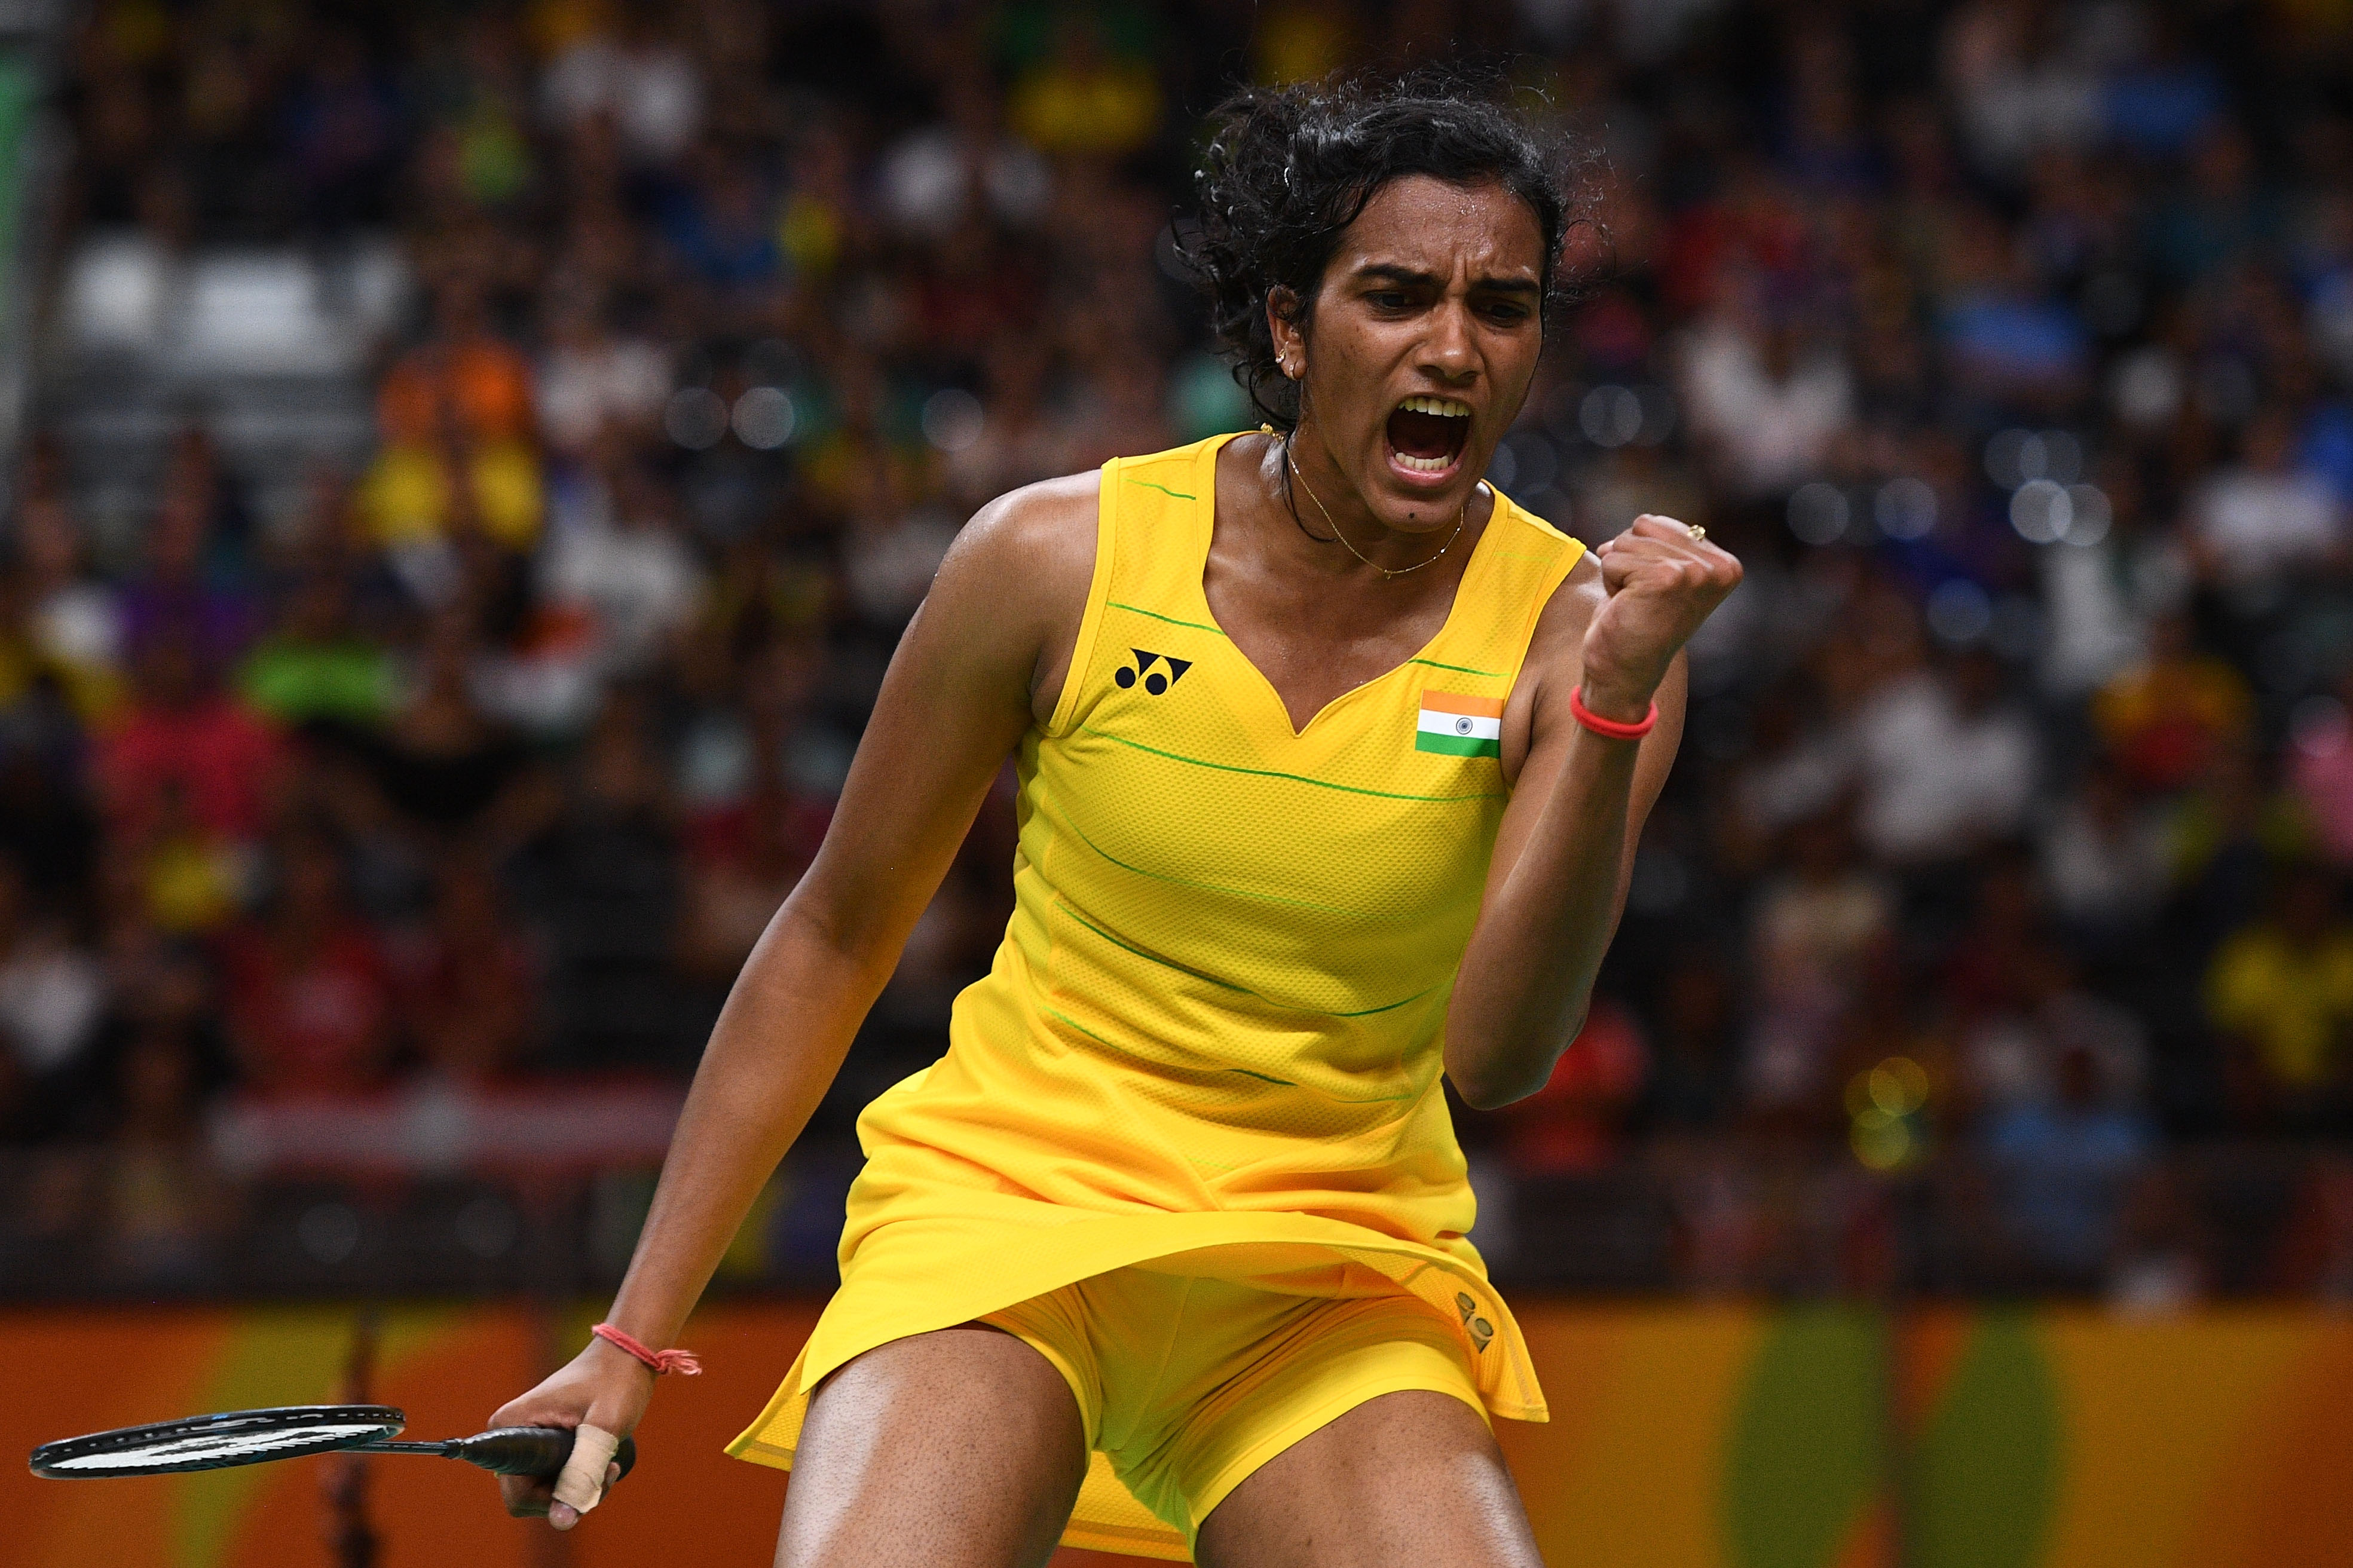 5000+ crowd waits to give grand welcome to PV Sindhu at Hyderabad